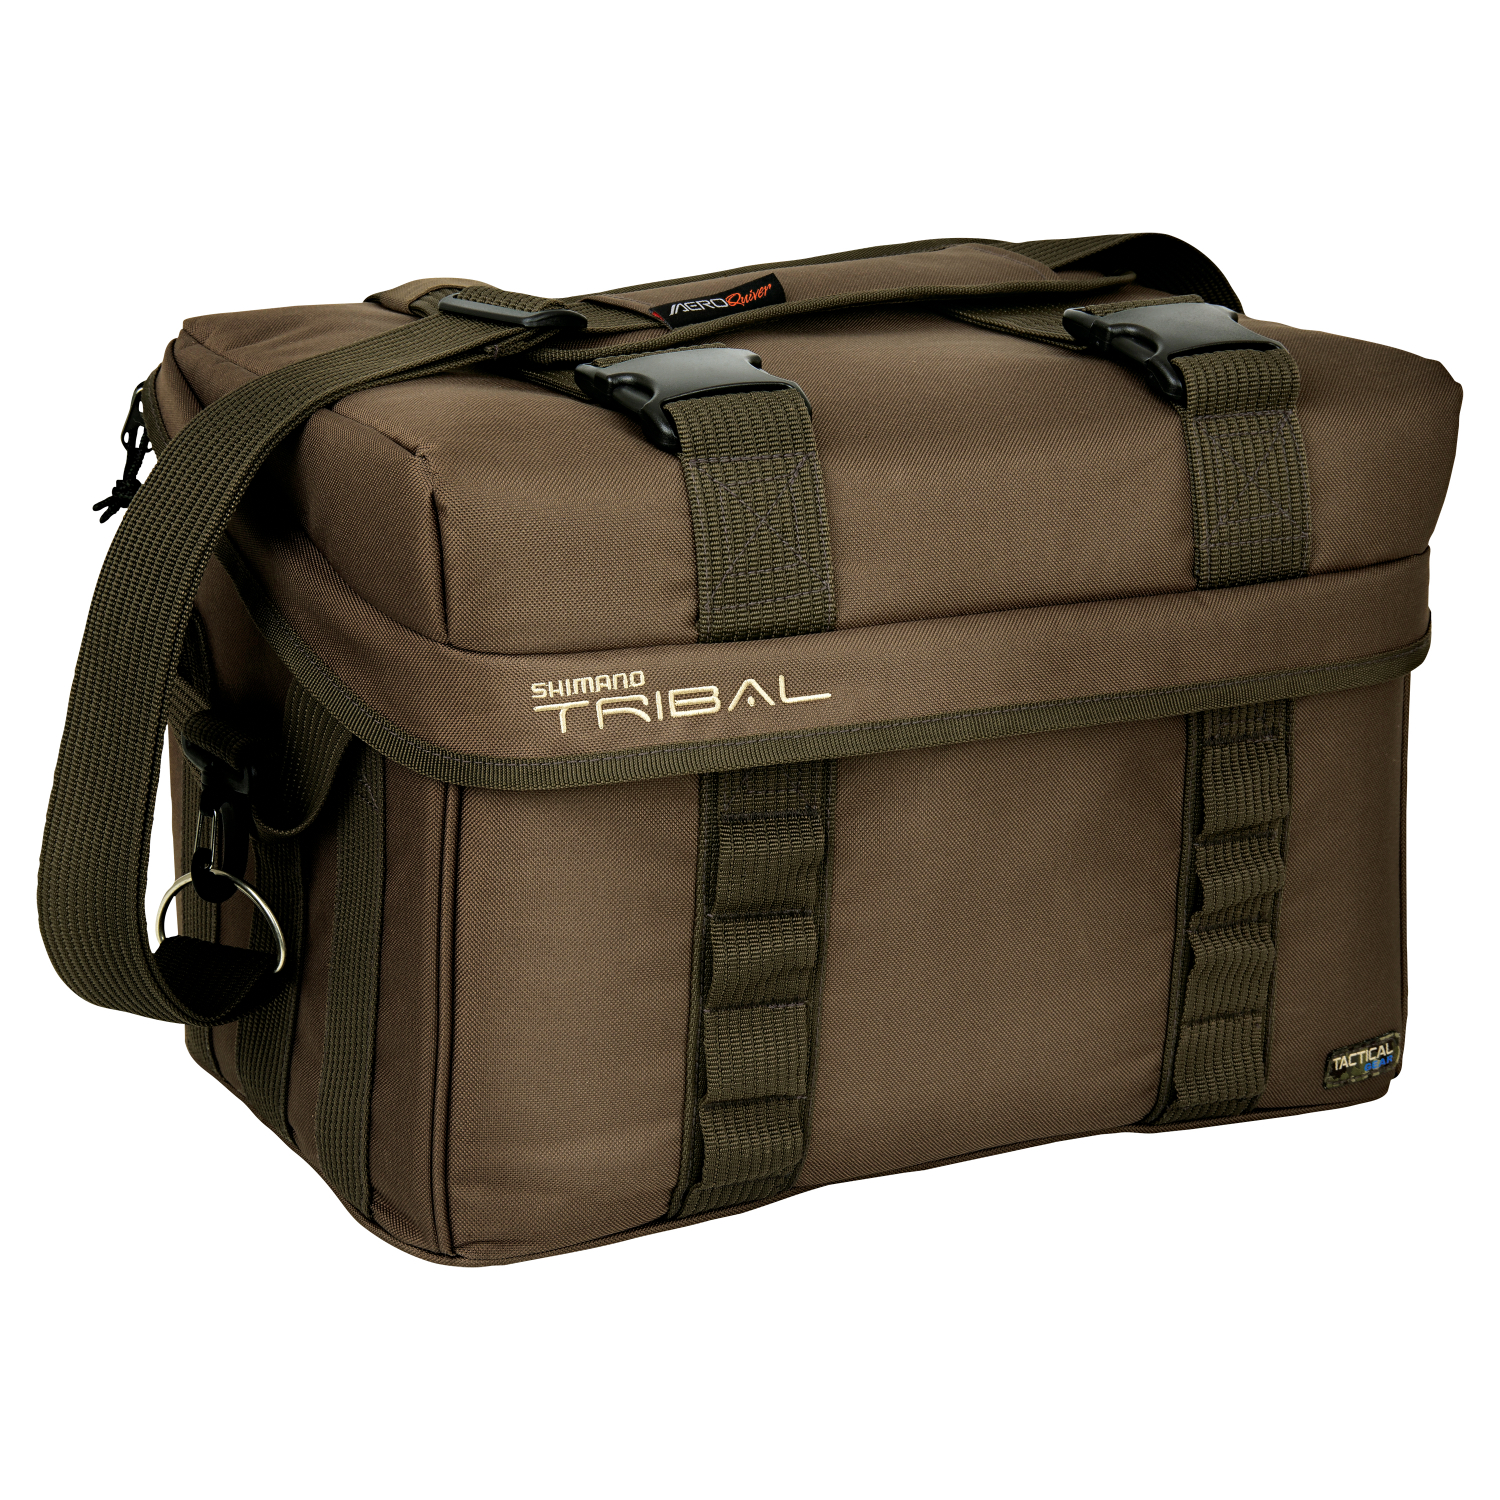 Shimano Tasche Tribal Full Compact Carryall 